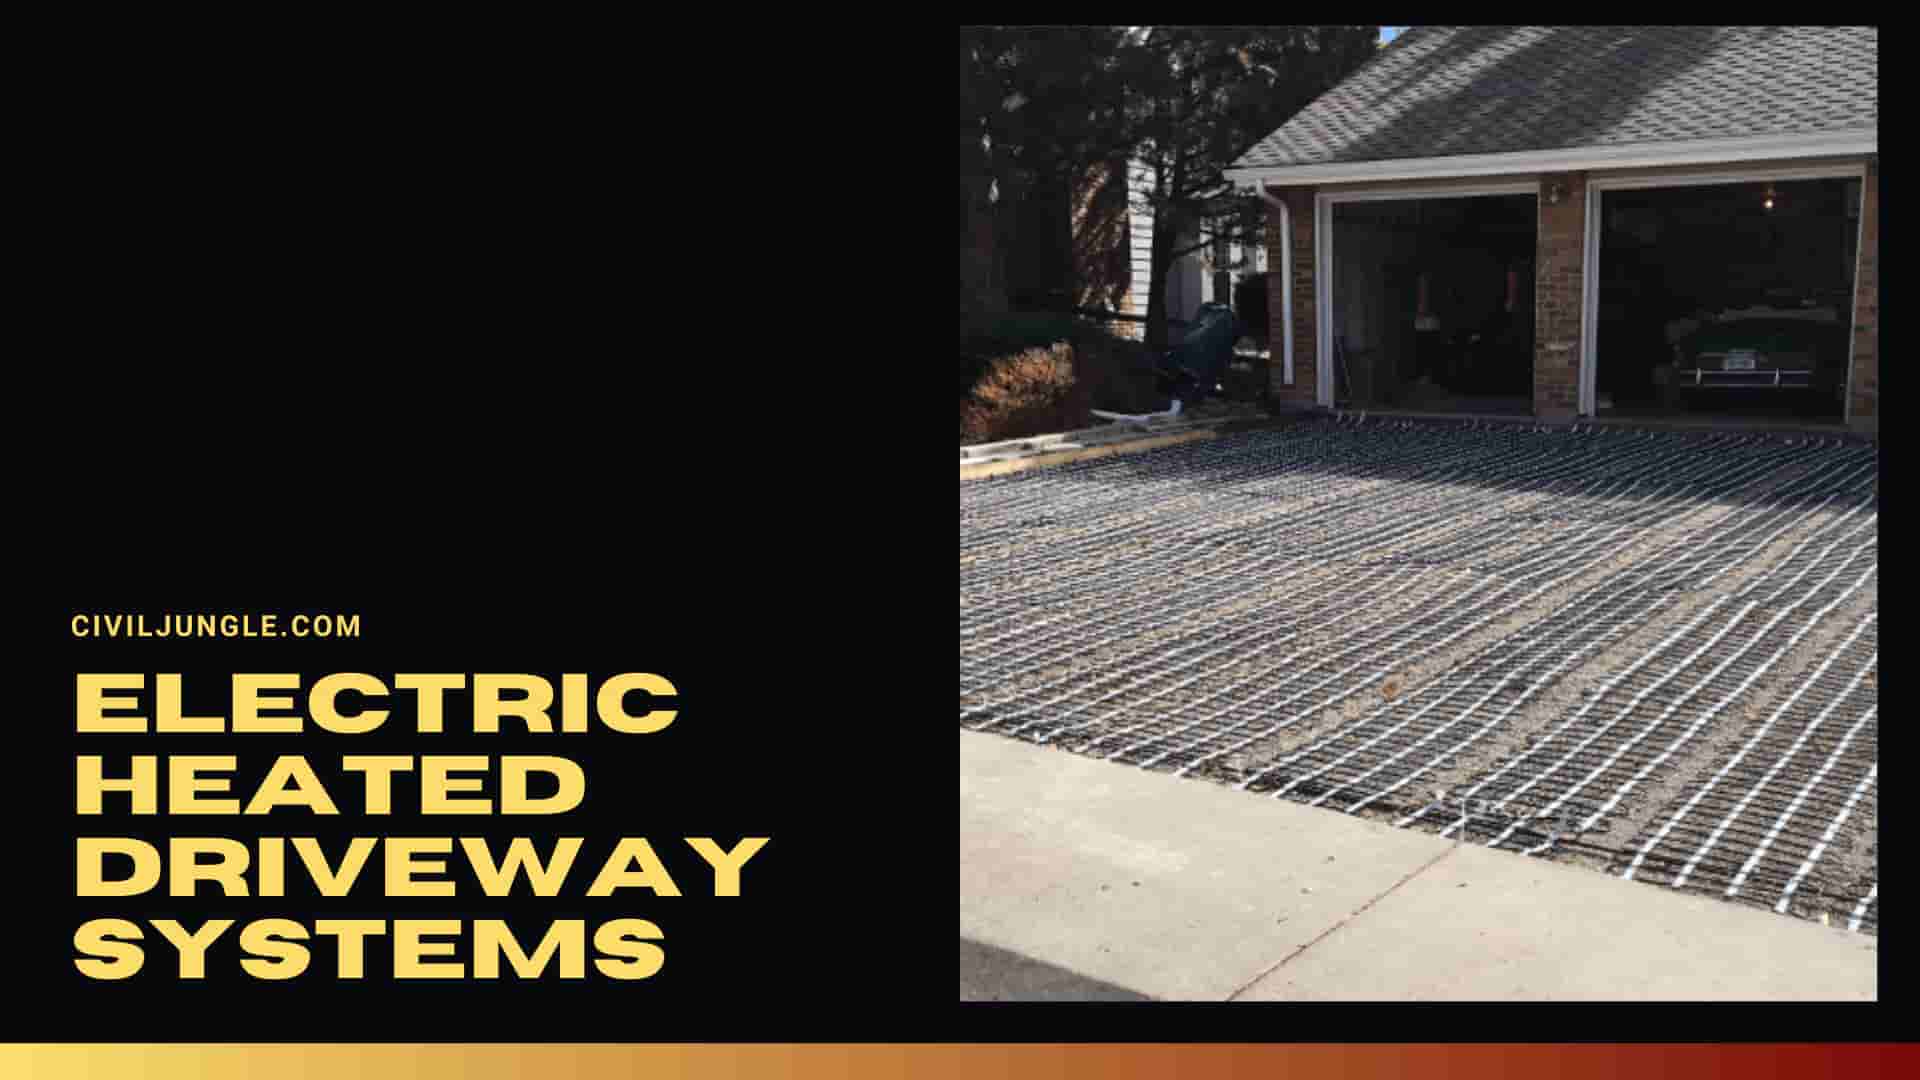 Electric Heated Driveway Systems